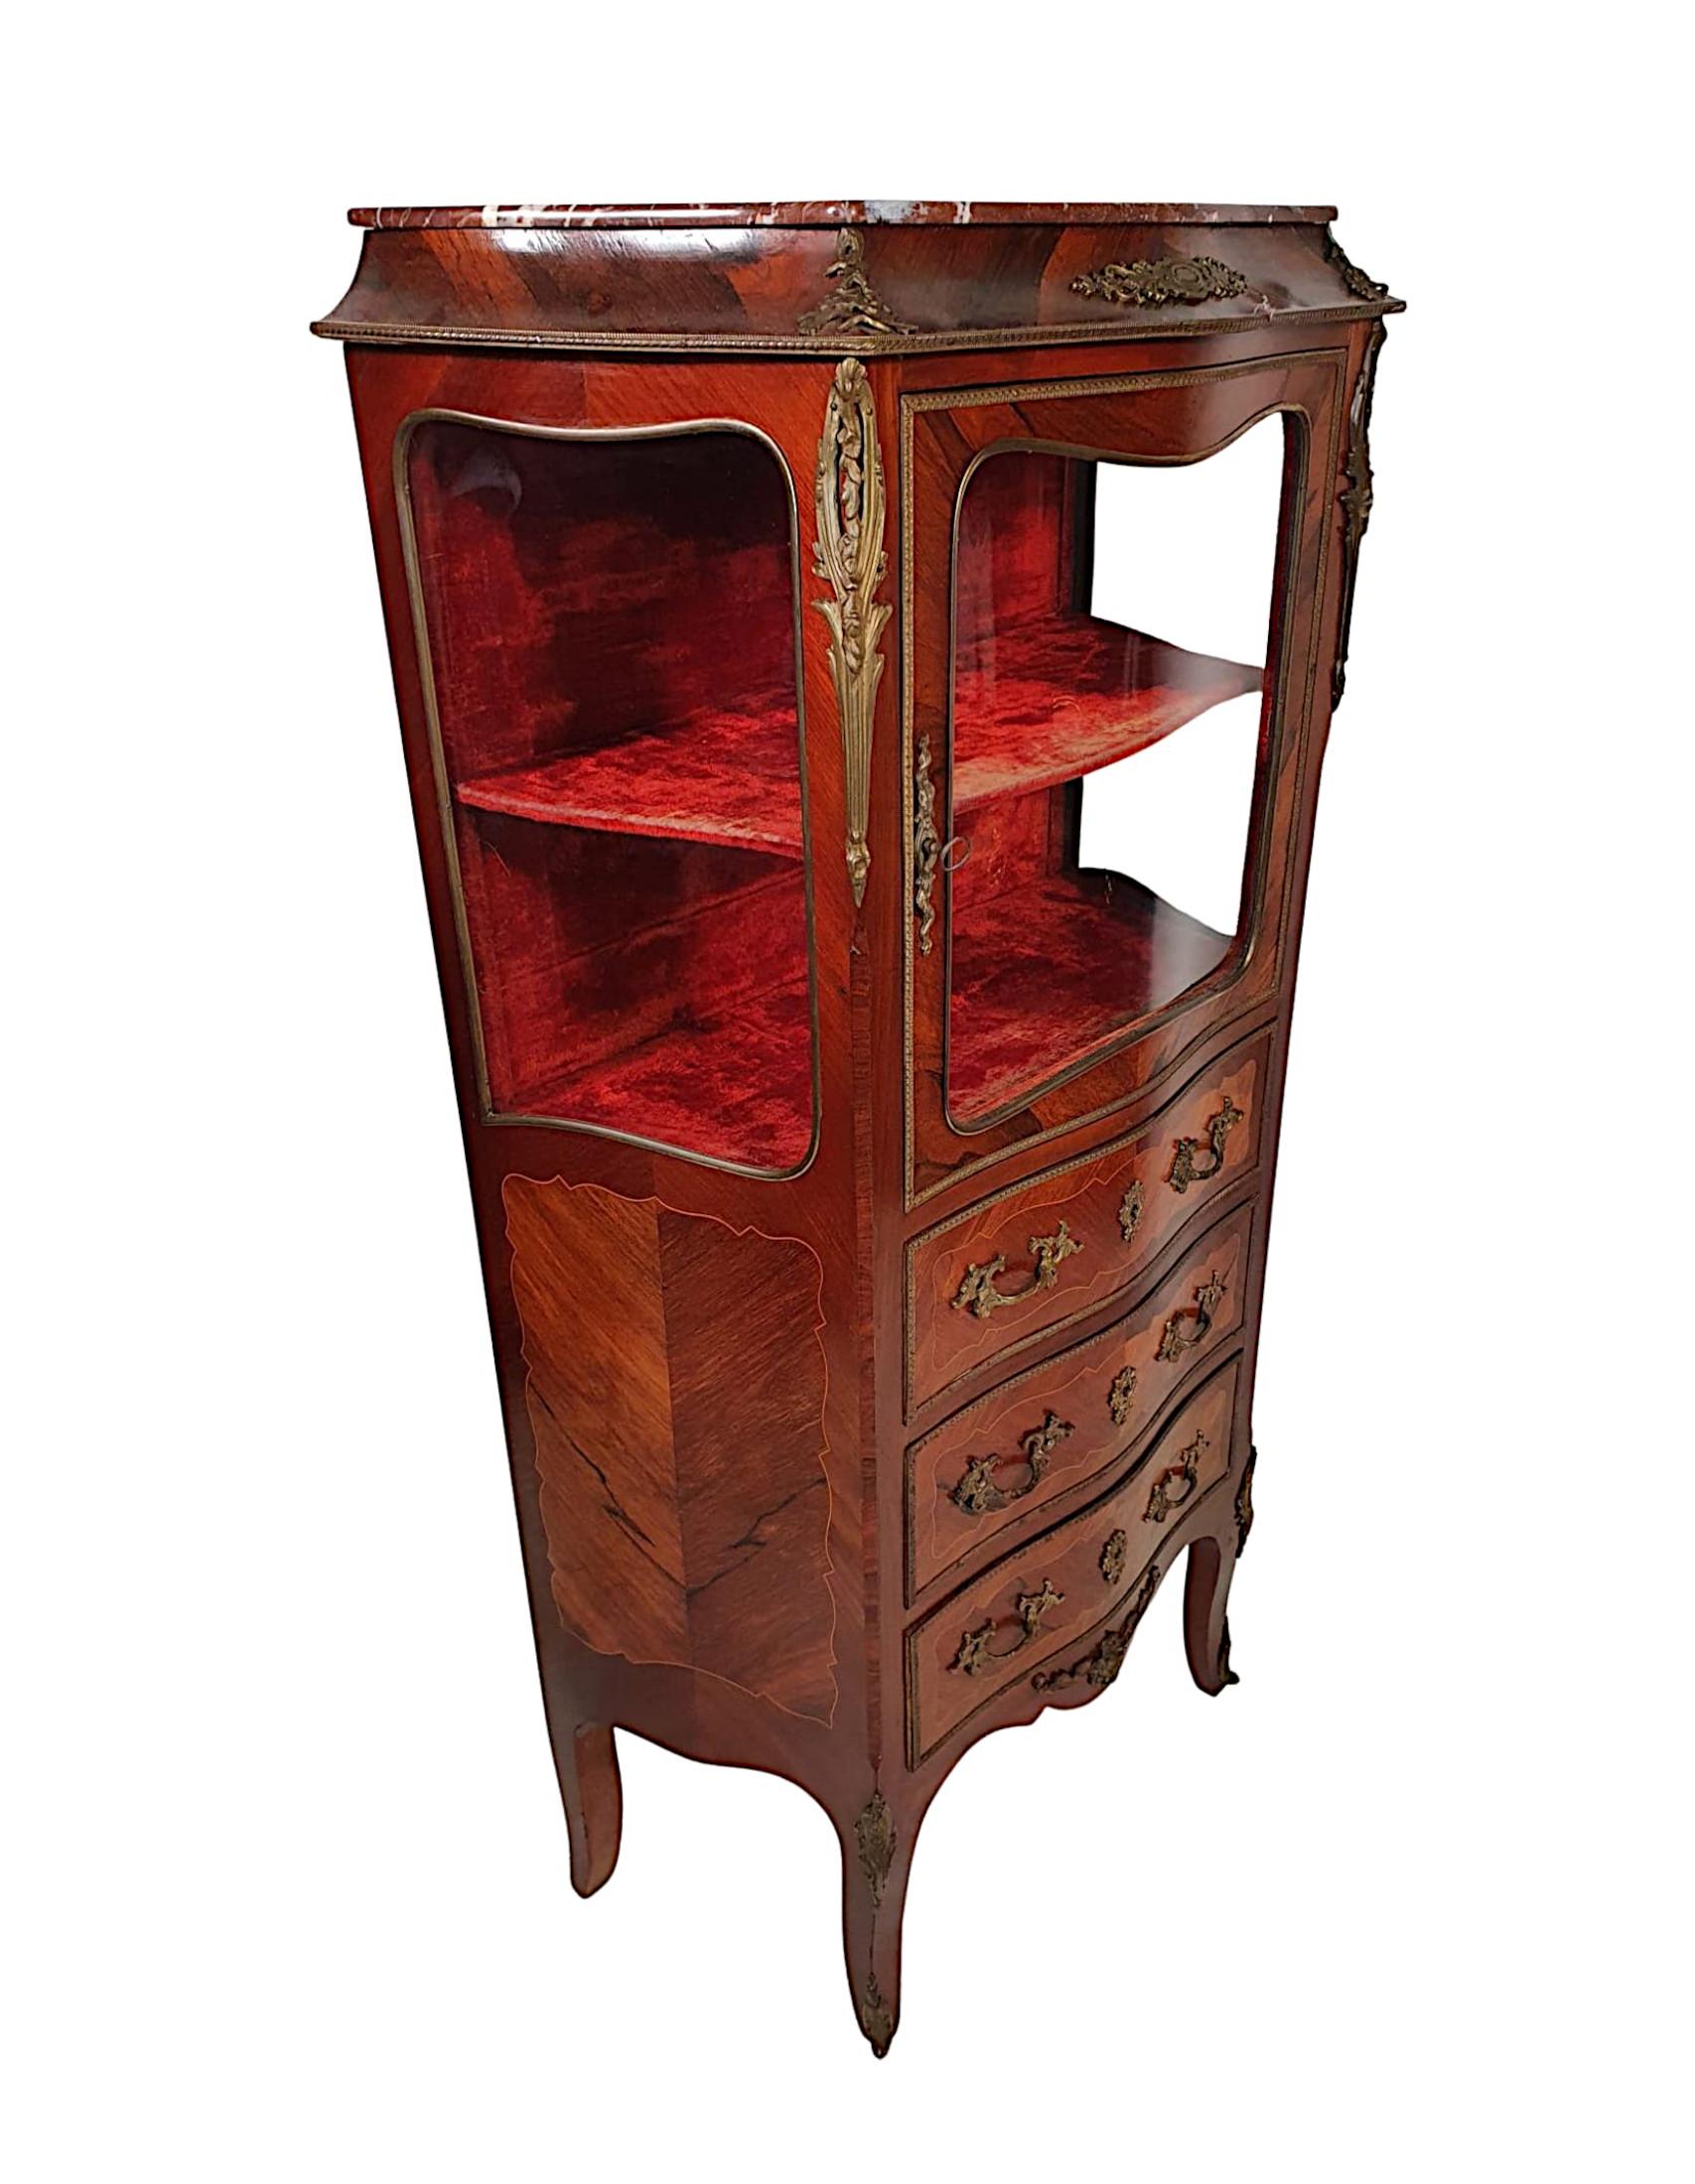 A fine French 19th century serpentine inlaid display or storage cabinet of neat proportions, cross banded and ormolu mounted throughout and with lovely patinated timbers comprising of kingwood and fruitwood. The shaped Rosso Levante marble top